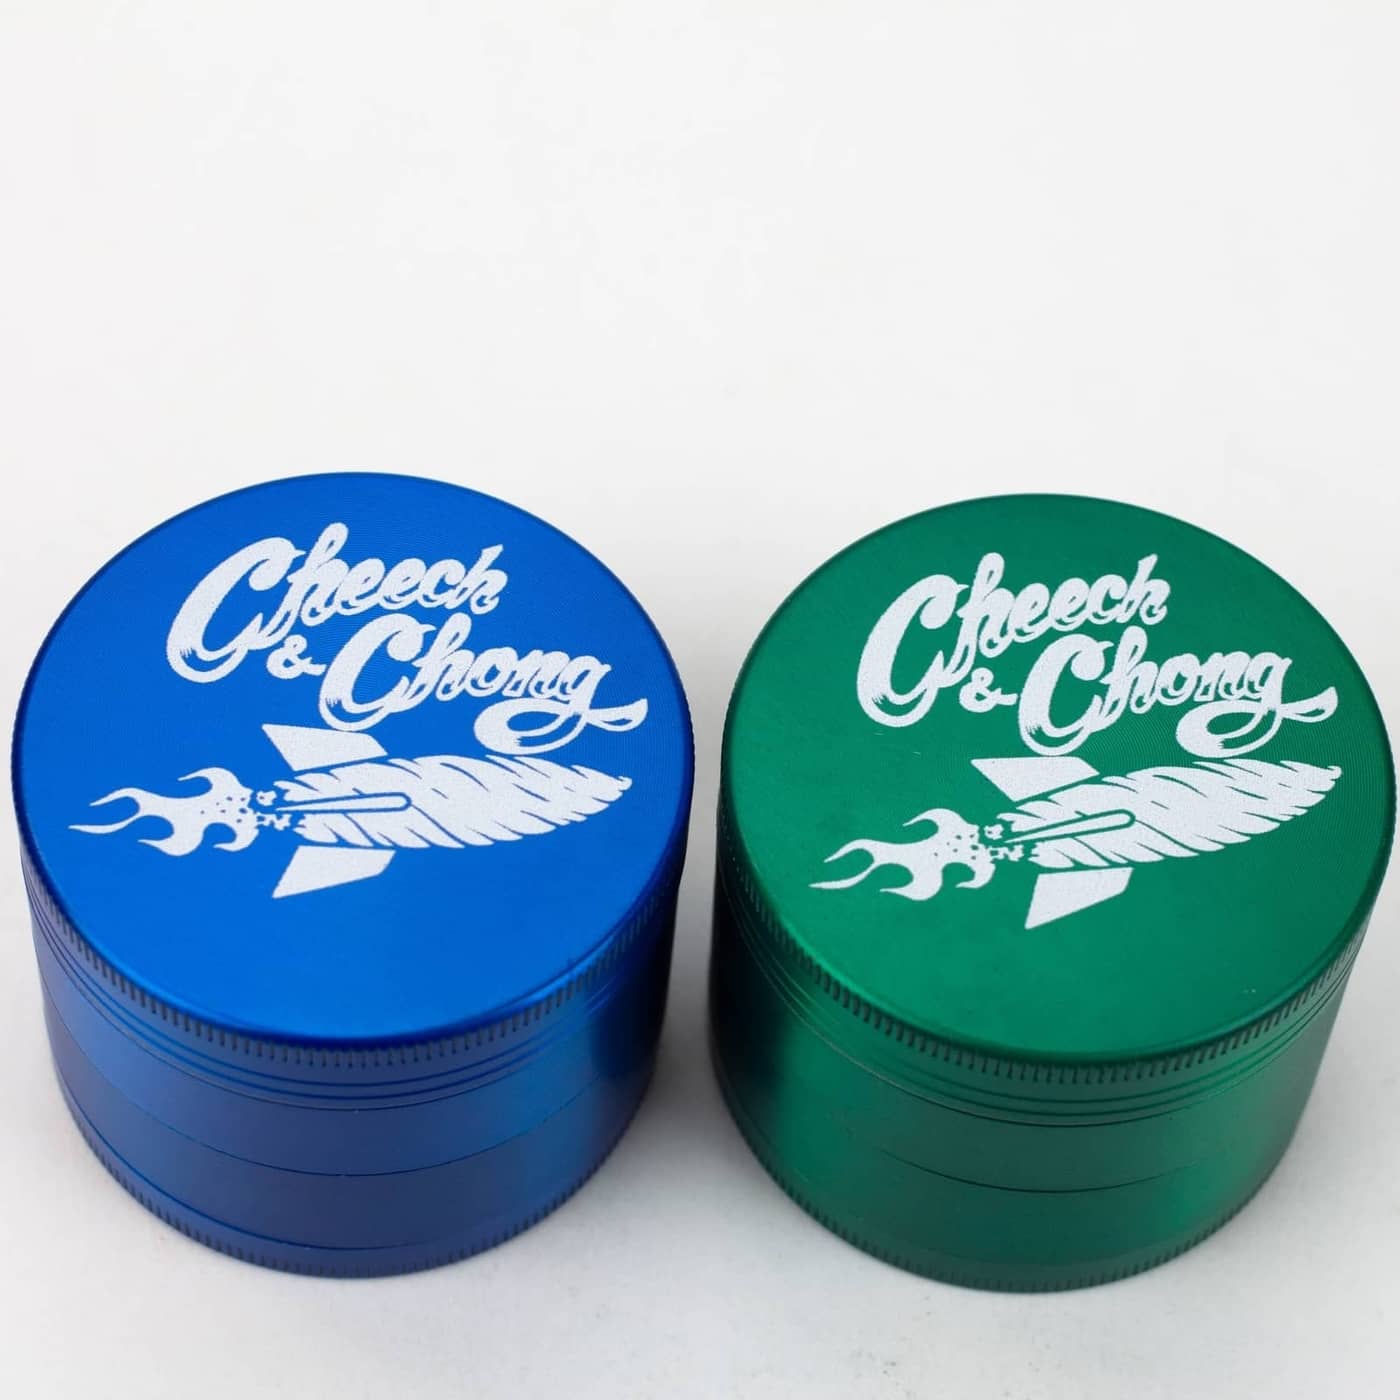 Cheech and Chong 4 Parts Metal Grinder duo up in somke